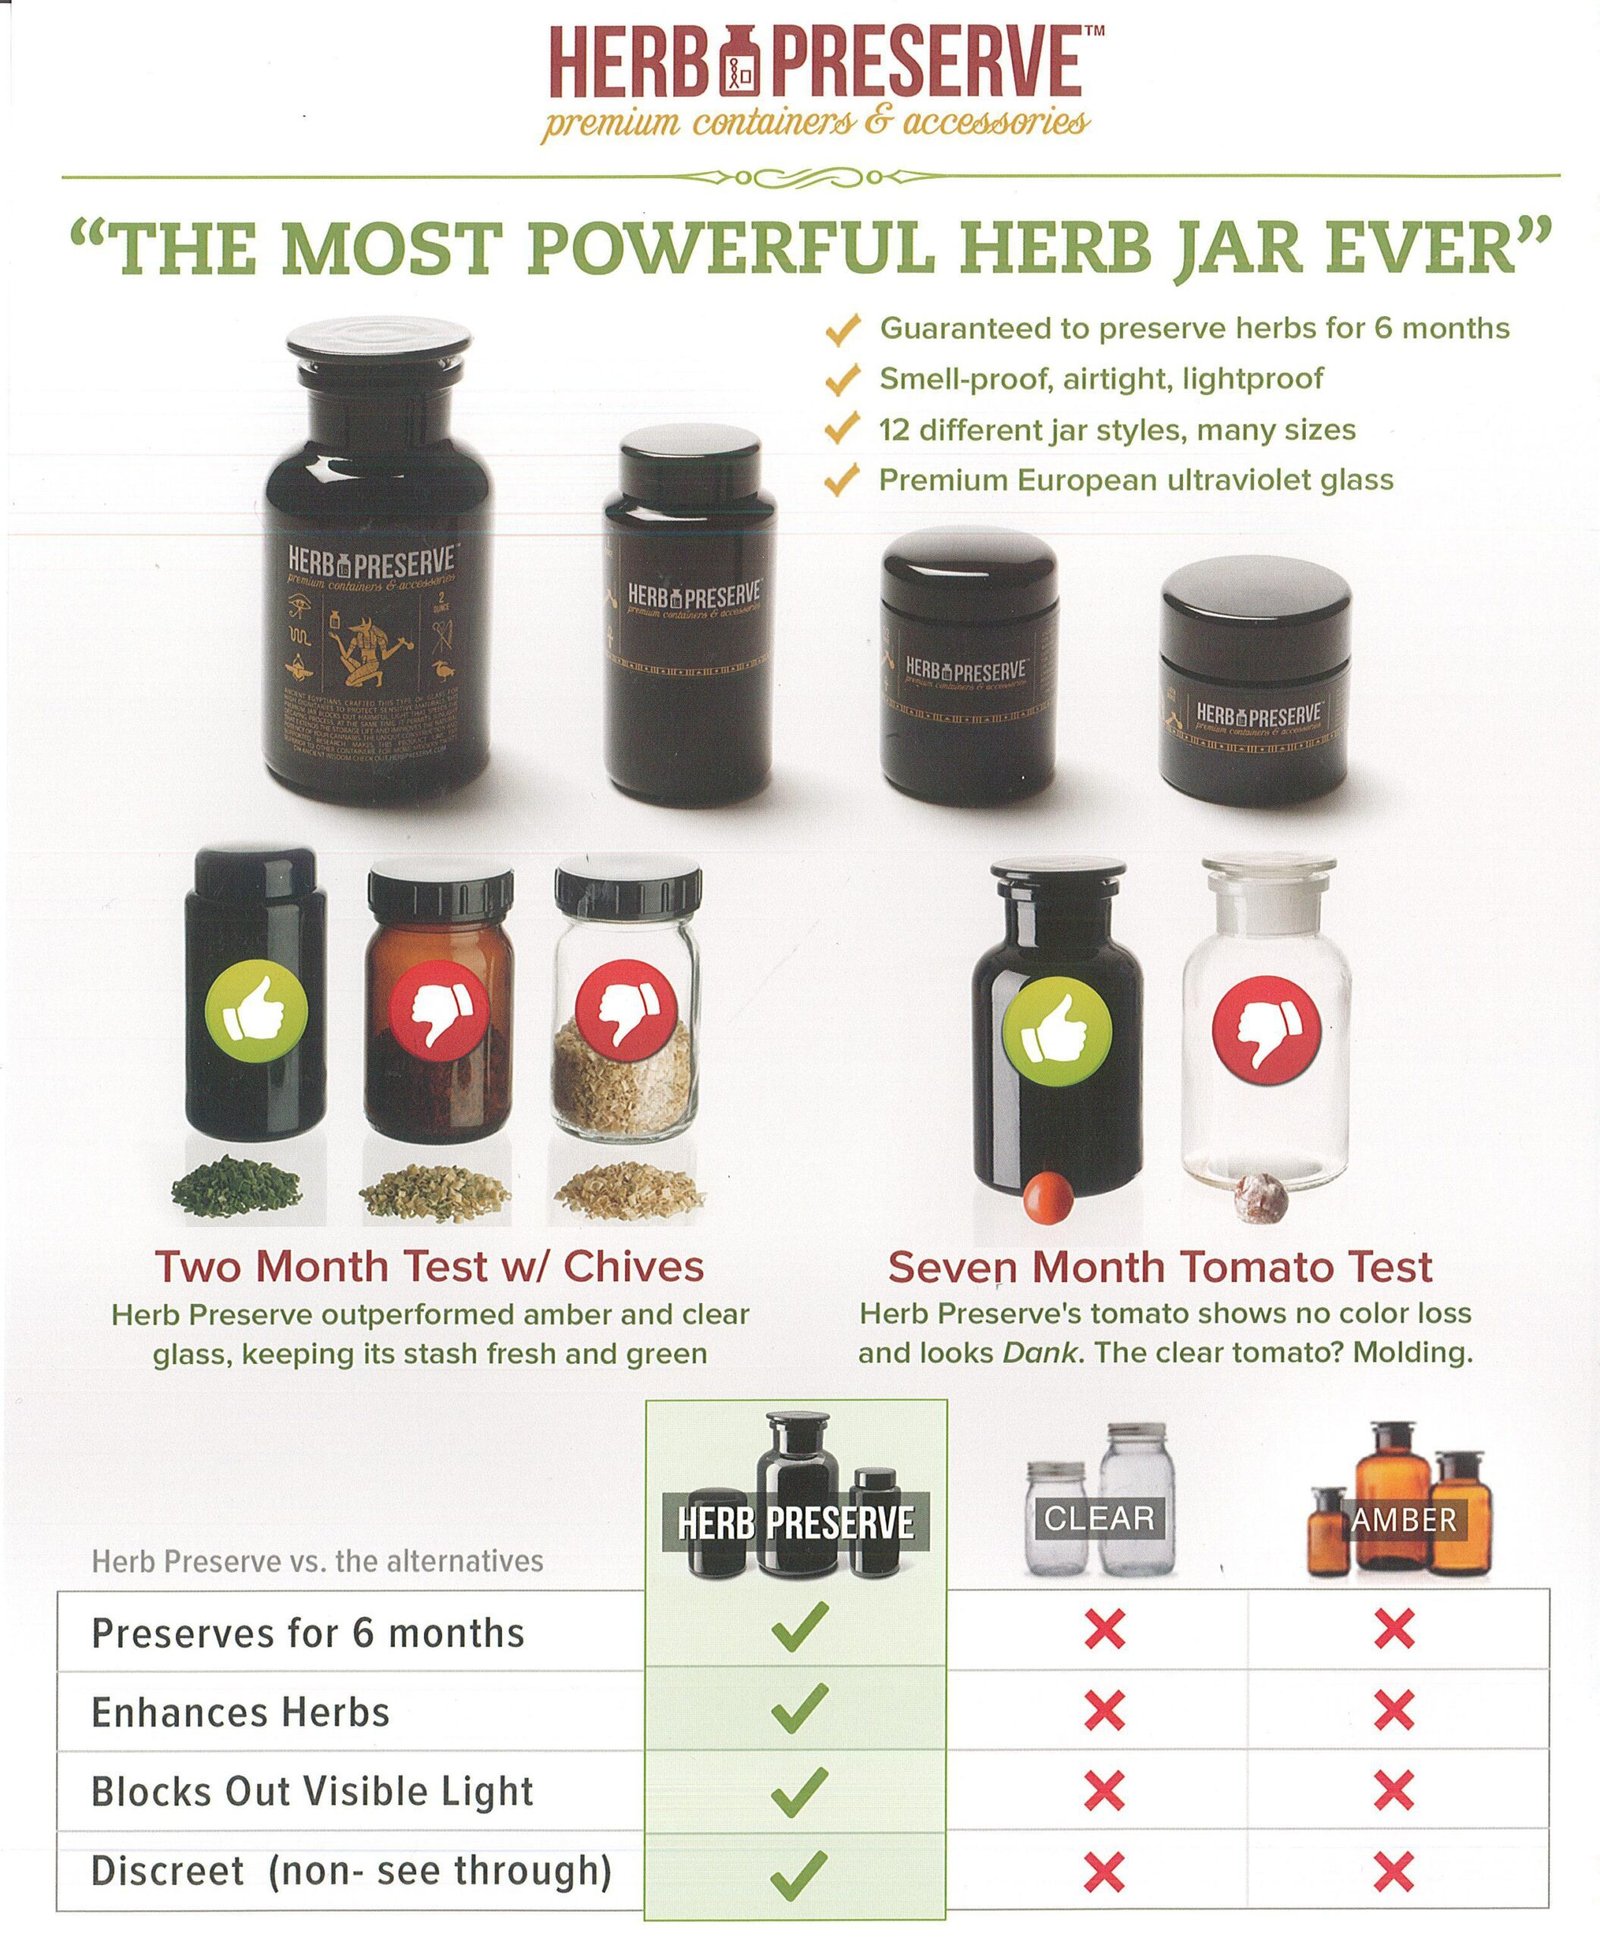 The Most Powerful Herb Jar Ever - Herb Preserve